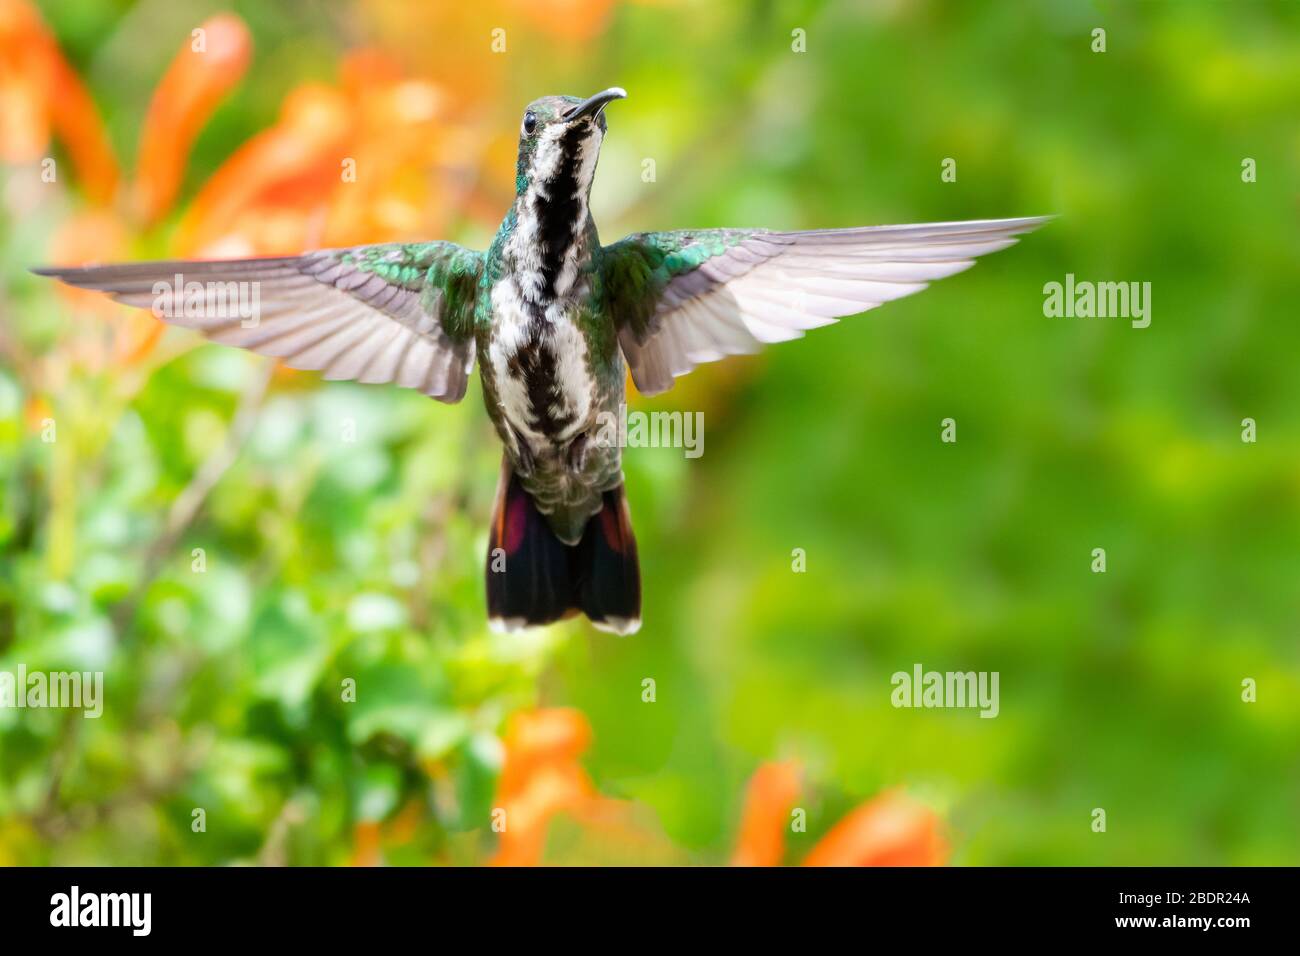 A female Black-throated Mango hummingbird hovering in a tropical garden with flowers and foliage blurred in the background. Stock Photo